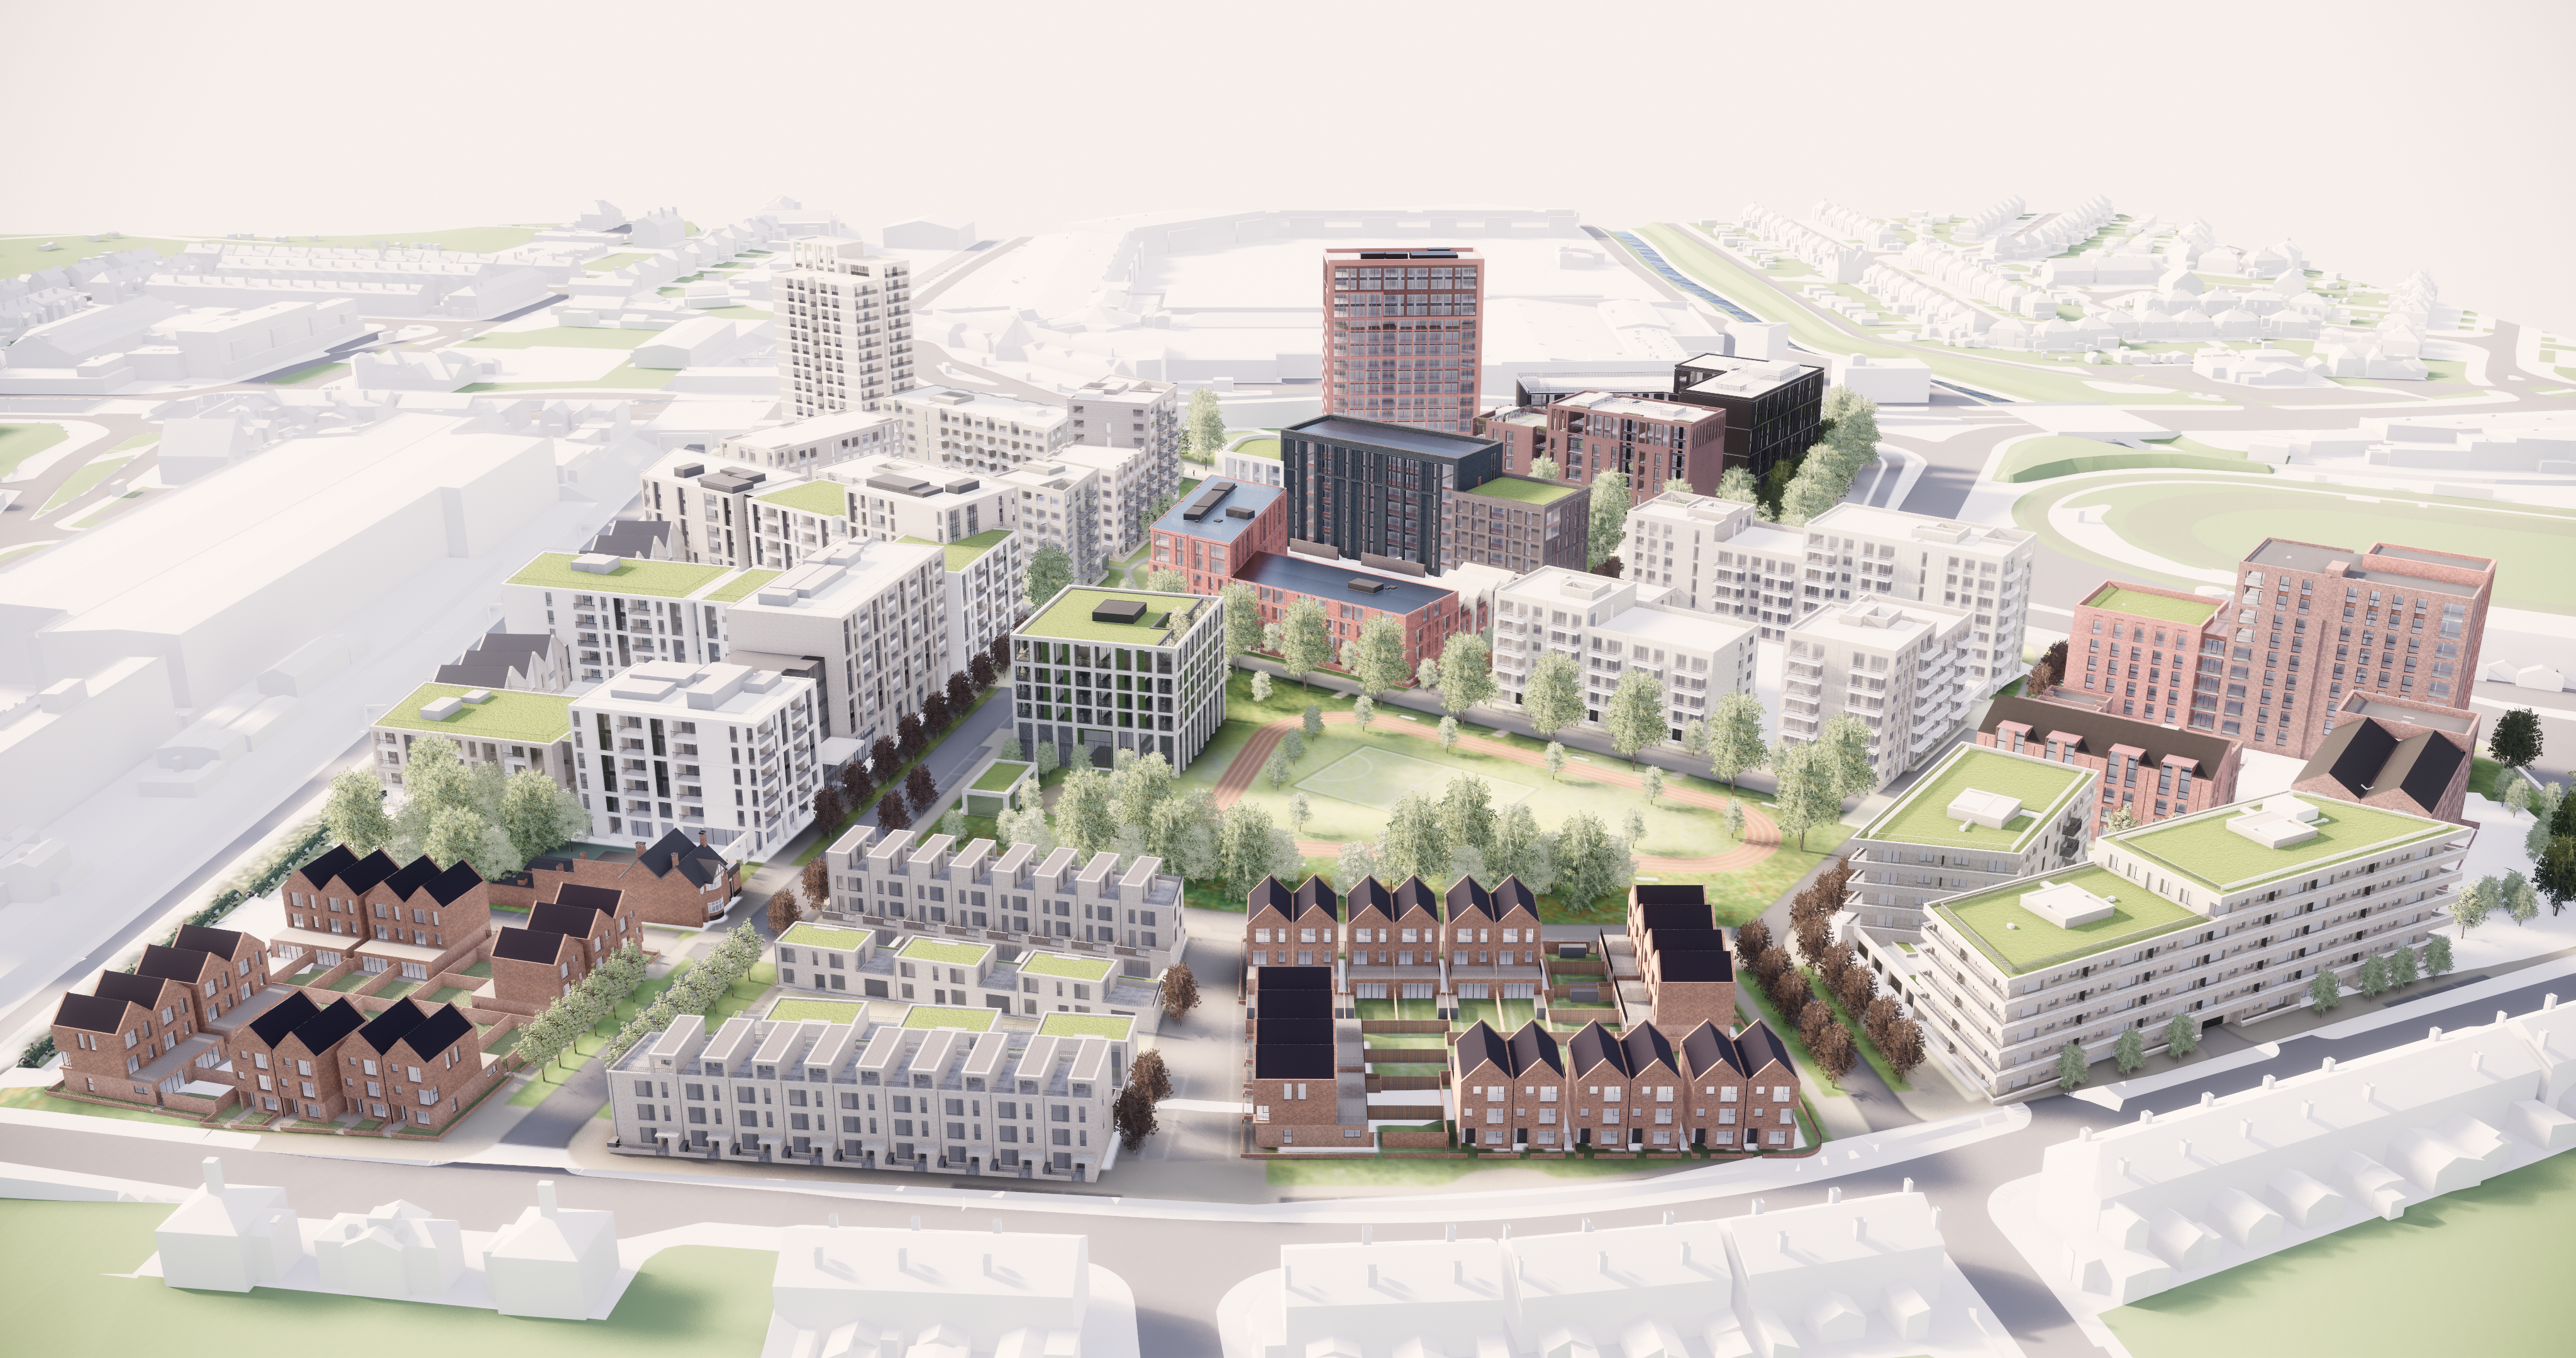 An artist's impression of the development, unanimously approved today by Birmingham CC planning committee.